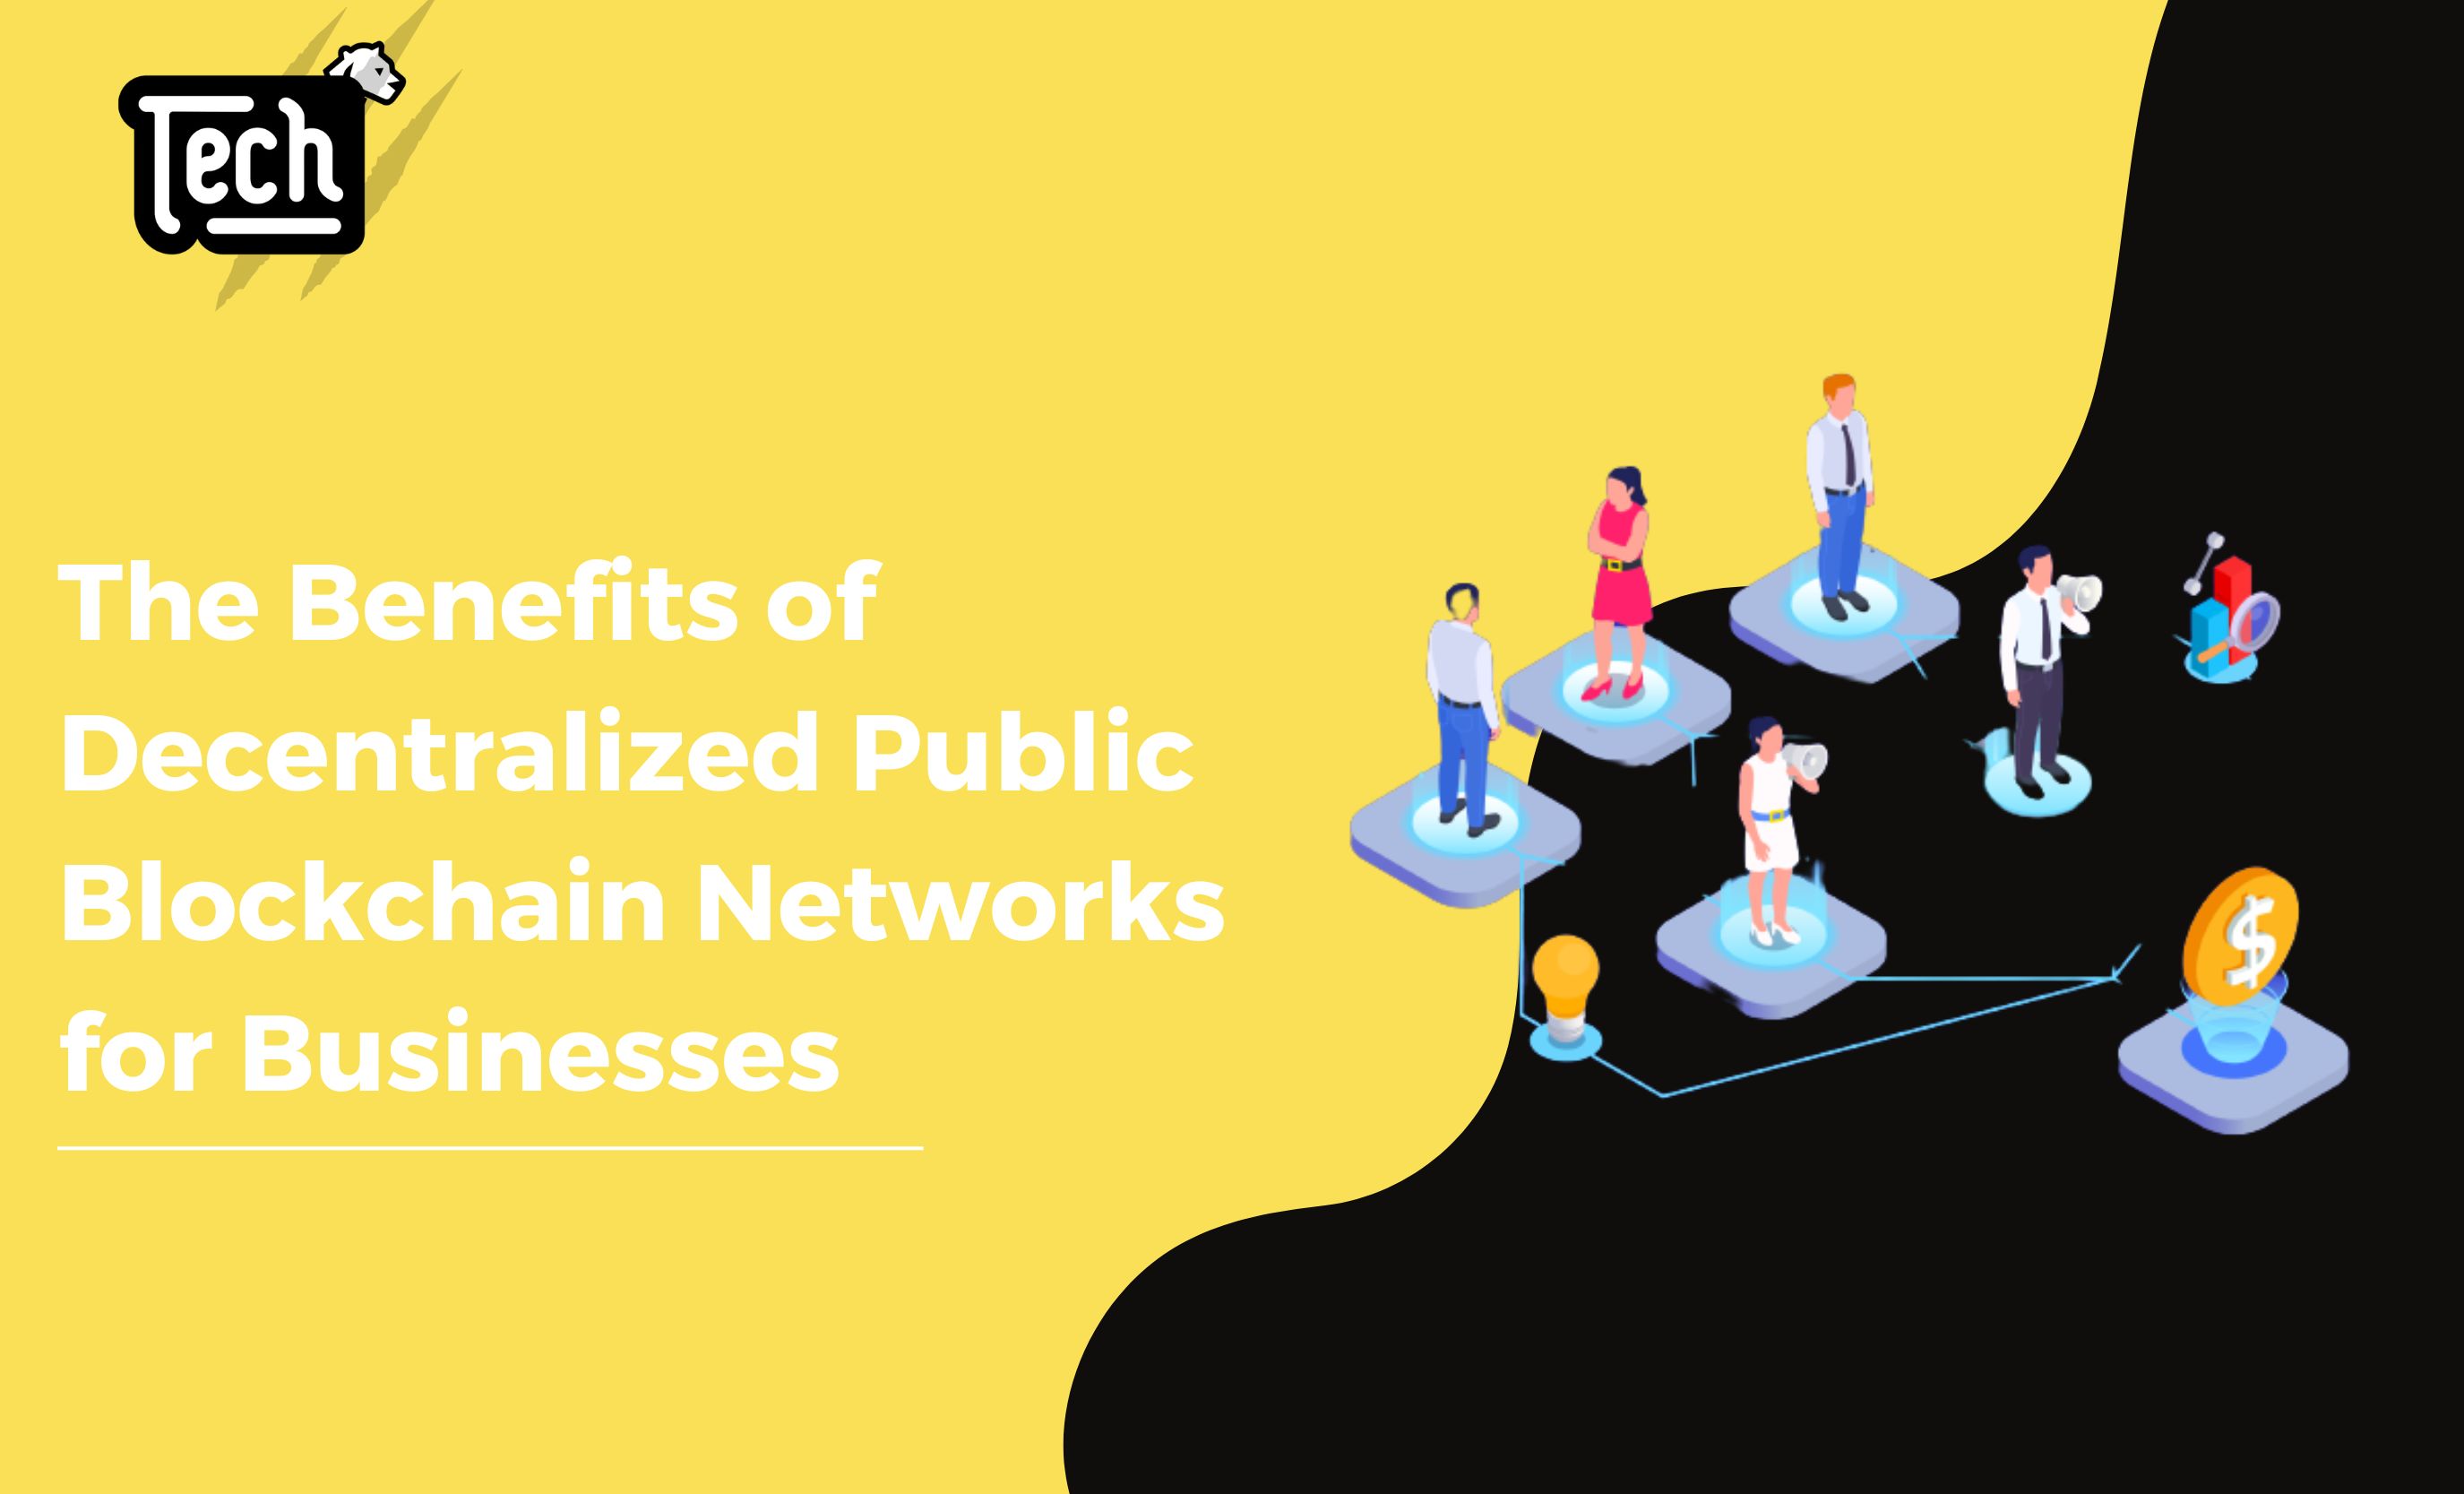 The Benefits of Decentralized Public Blockchain Networks for Businesses